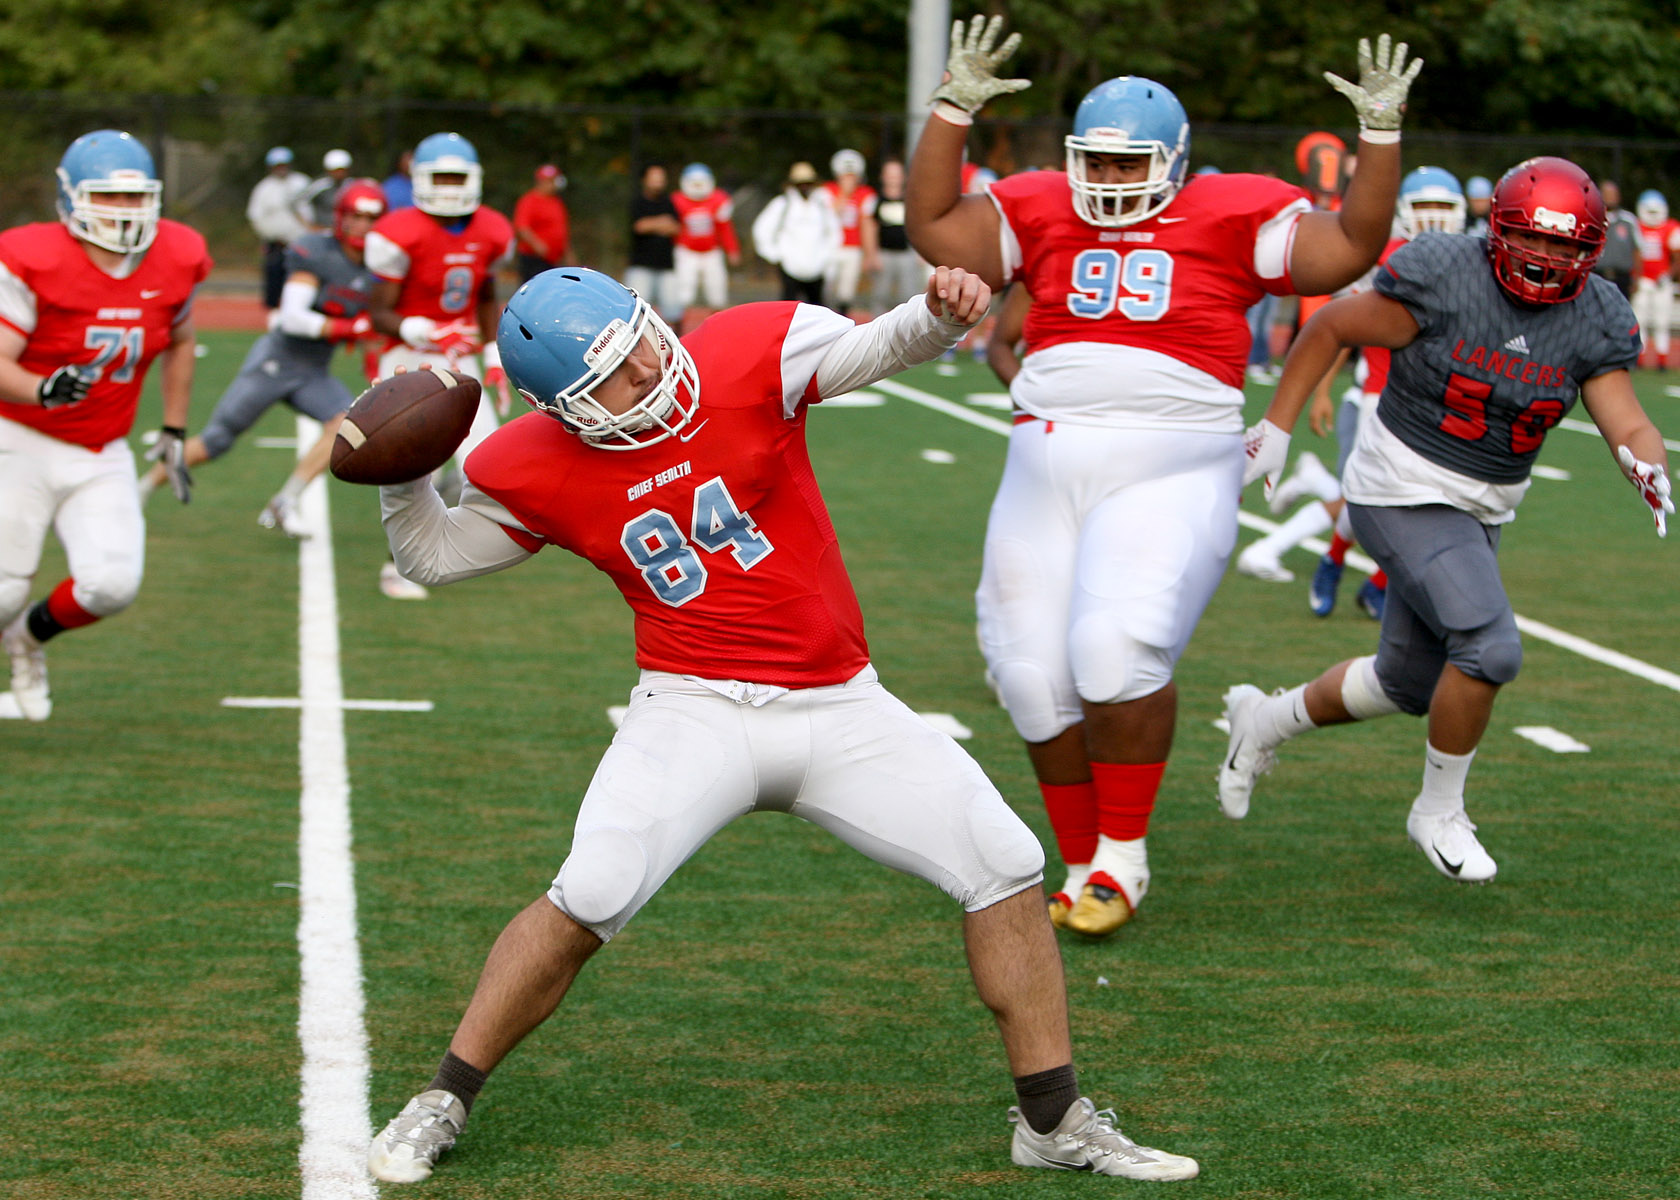 On a double hand off trick play Javier Deltoro of Chief Sealth lets one fly.